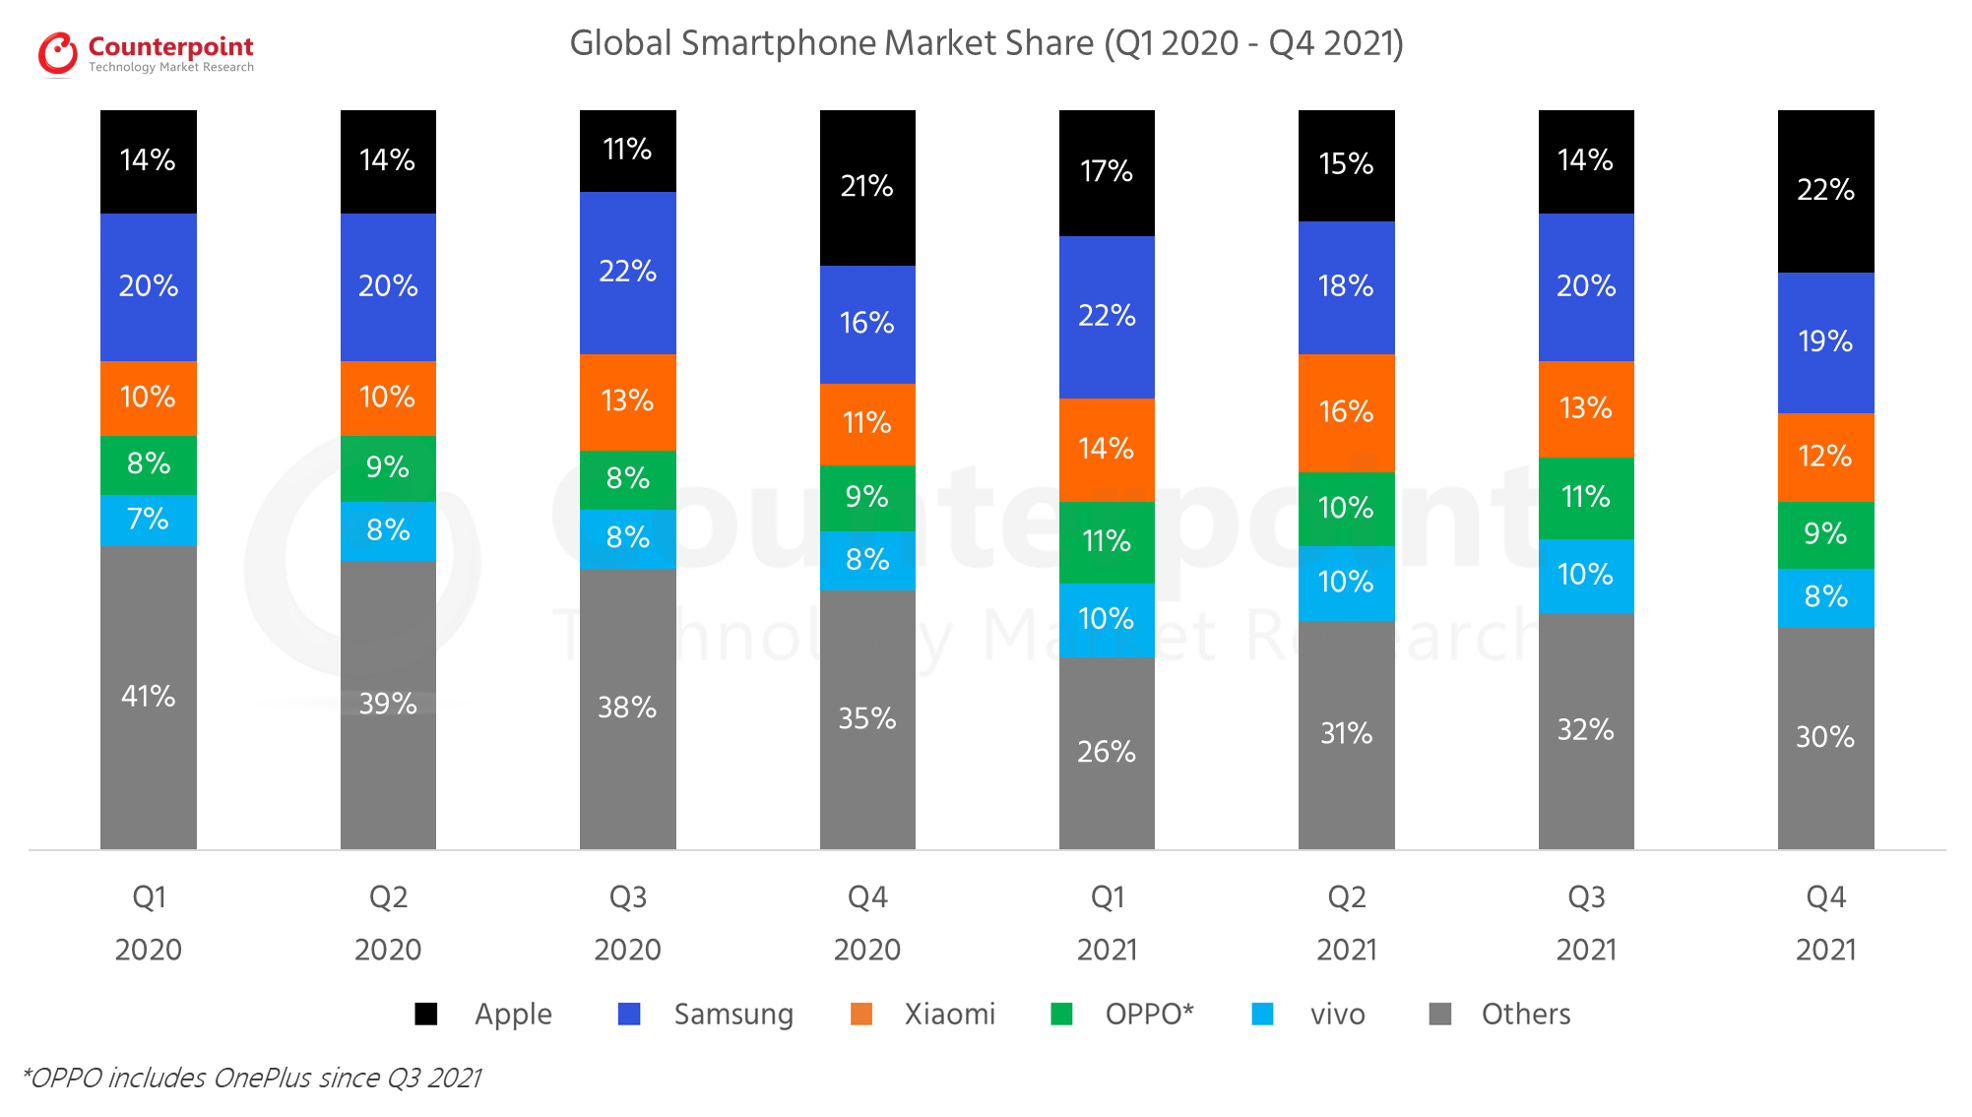 Counterpoint Research - Q4 2021 - Global Smartphone Market